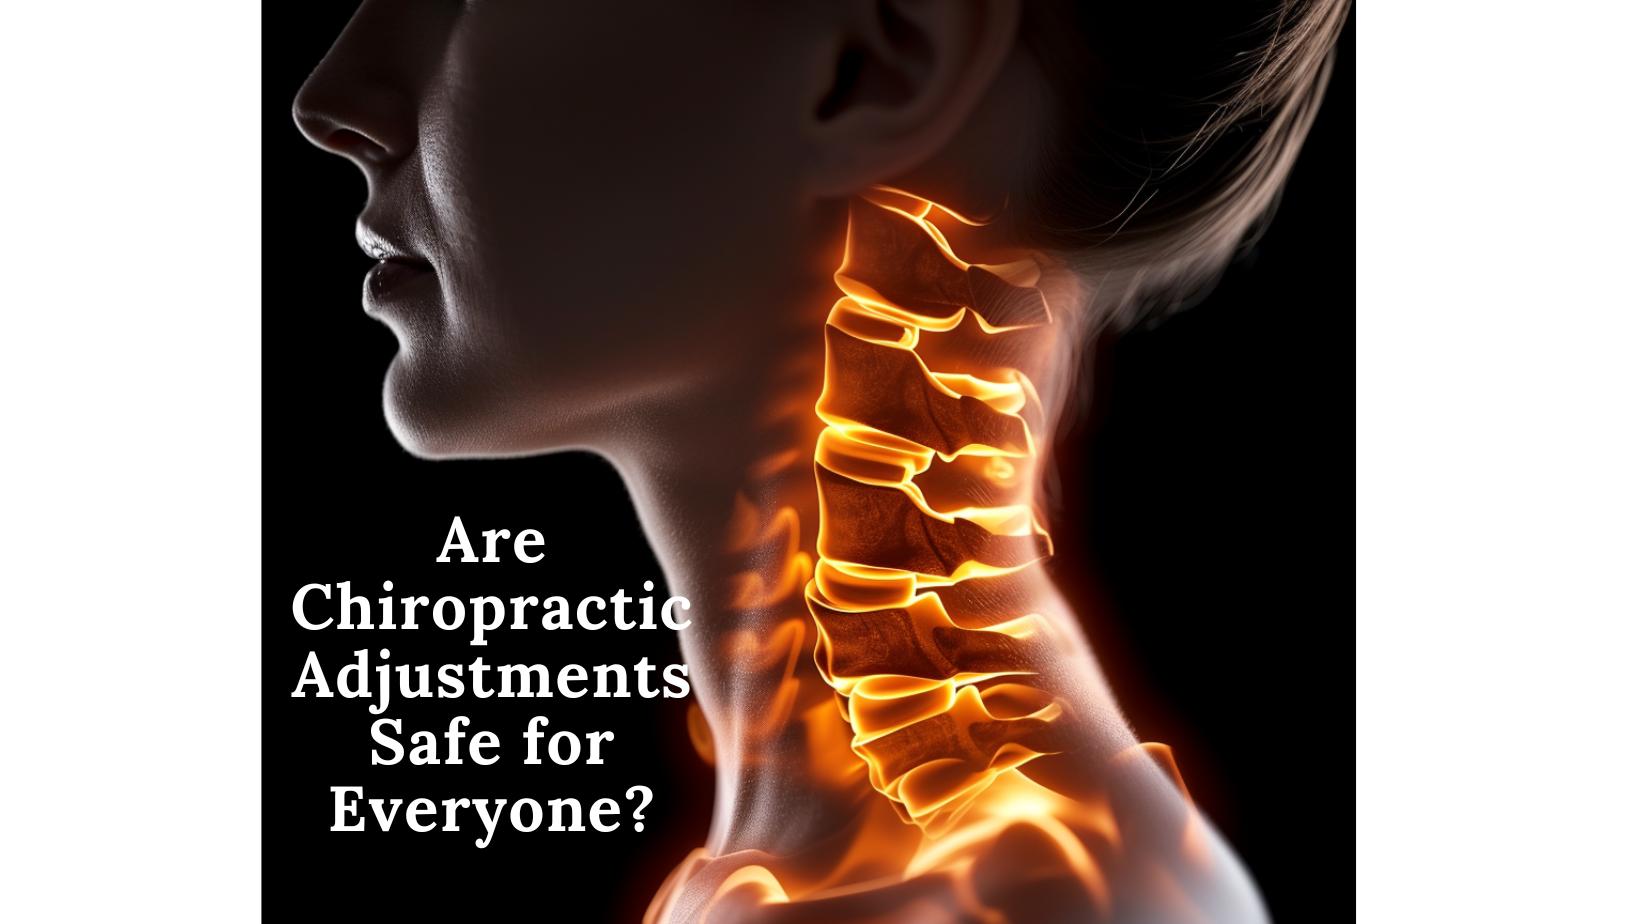 Are Chiropractic Care Adjustments Safe for Everyone